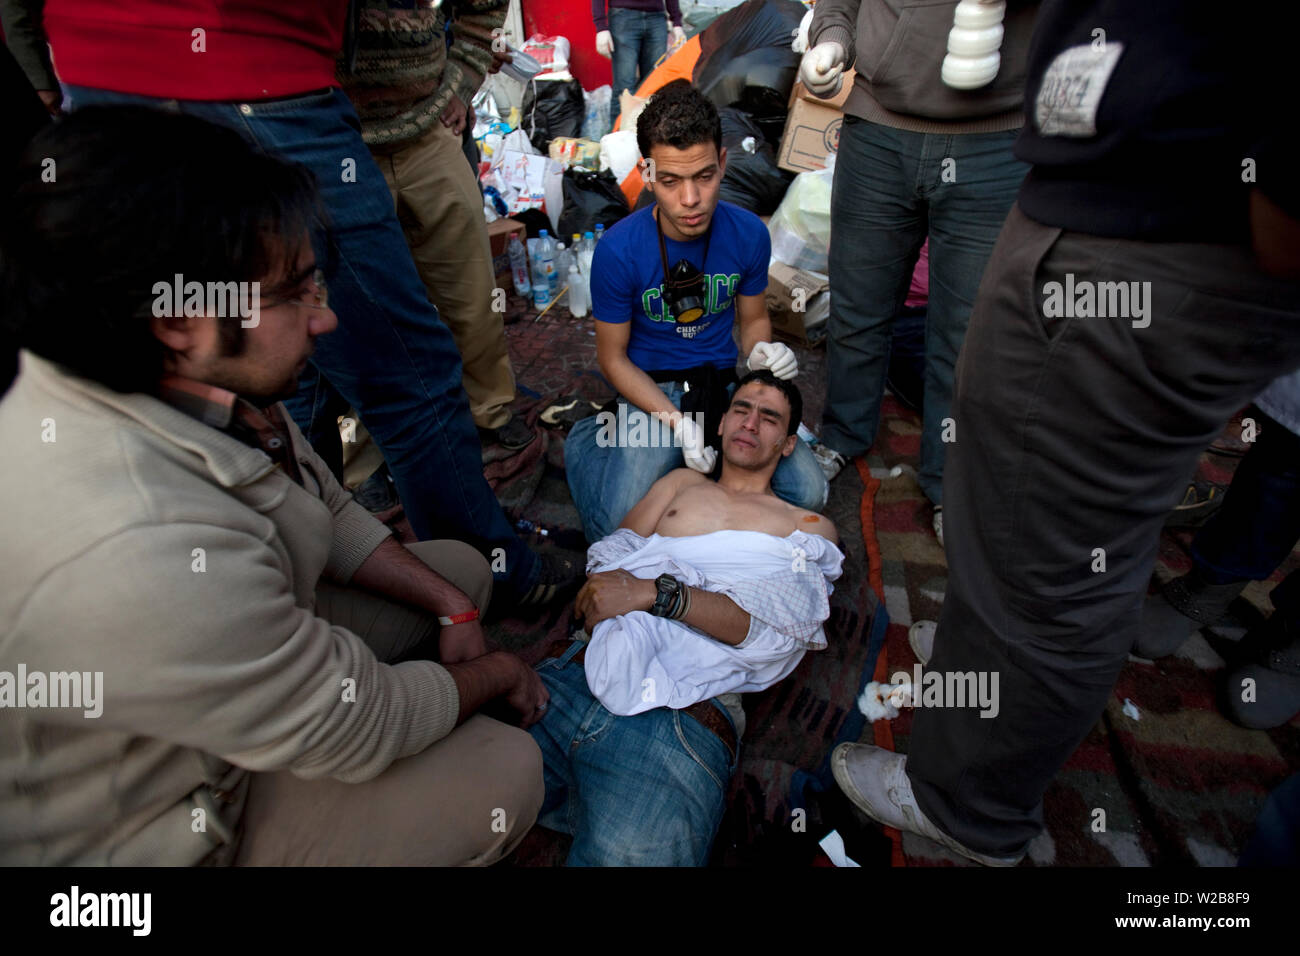 November 21, 2011 – Cairo, Egypt - Egyptian medical team treat an Egyptian protester injured by rubber bullets at a field clinic in Cairo’s Tahrir Square. Security forces fired tear gas and rubber bullets during clashes with several thousand protesters in Cairo's Tahrir Square in the third straight day of violence that has killed at least 24 people and has turned into the most sustained challenge yet to the rule of Egypt's military. Protesters are calling on the ruling military to quickly announce a date for the transfer of power to a civilian administration. The clashes were the biggest outbr Stock Photo